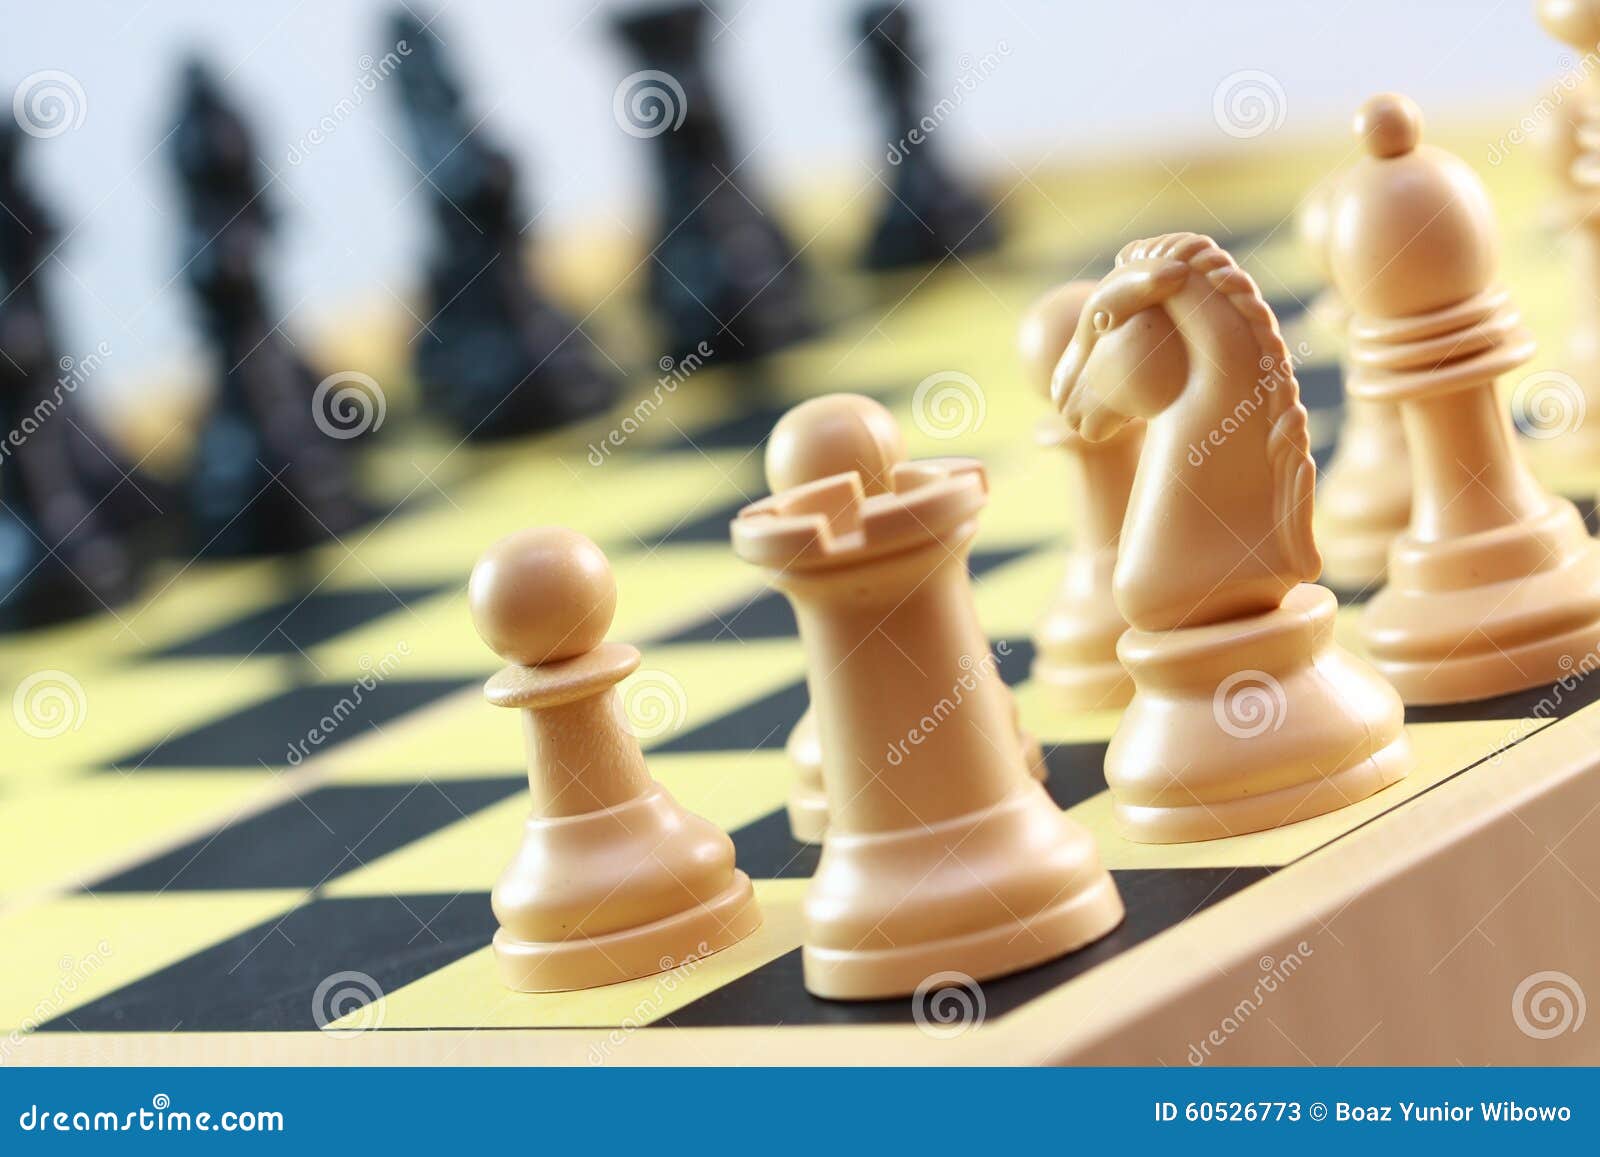 chess board games